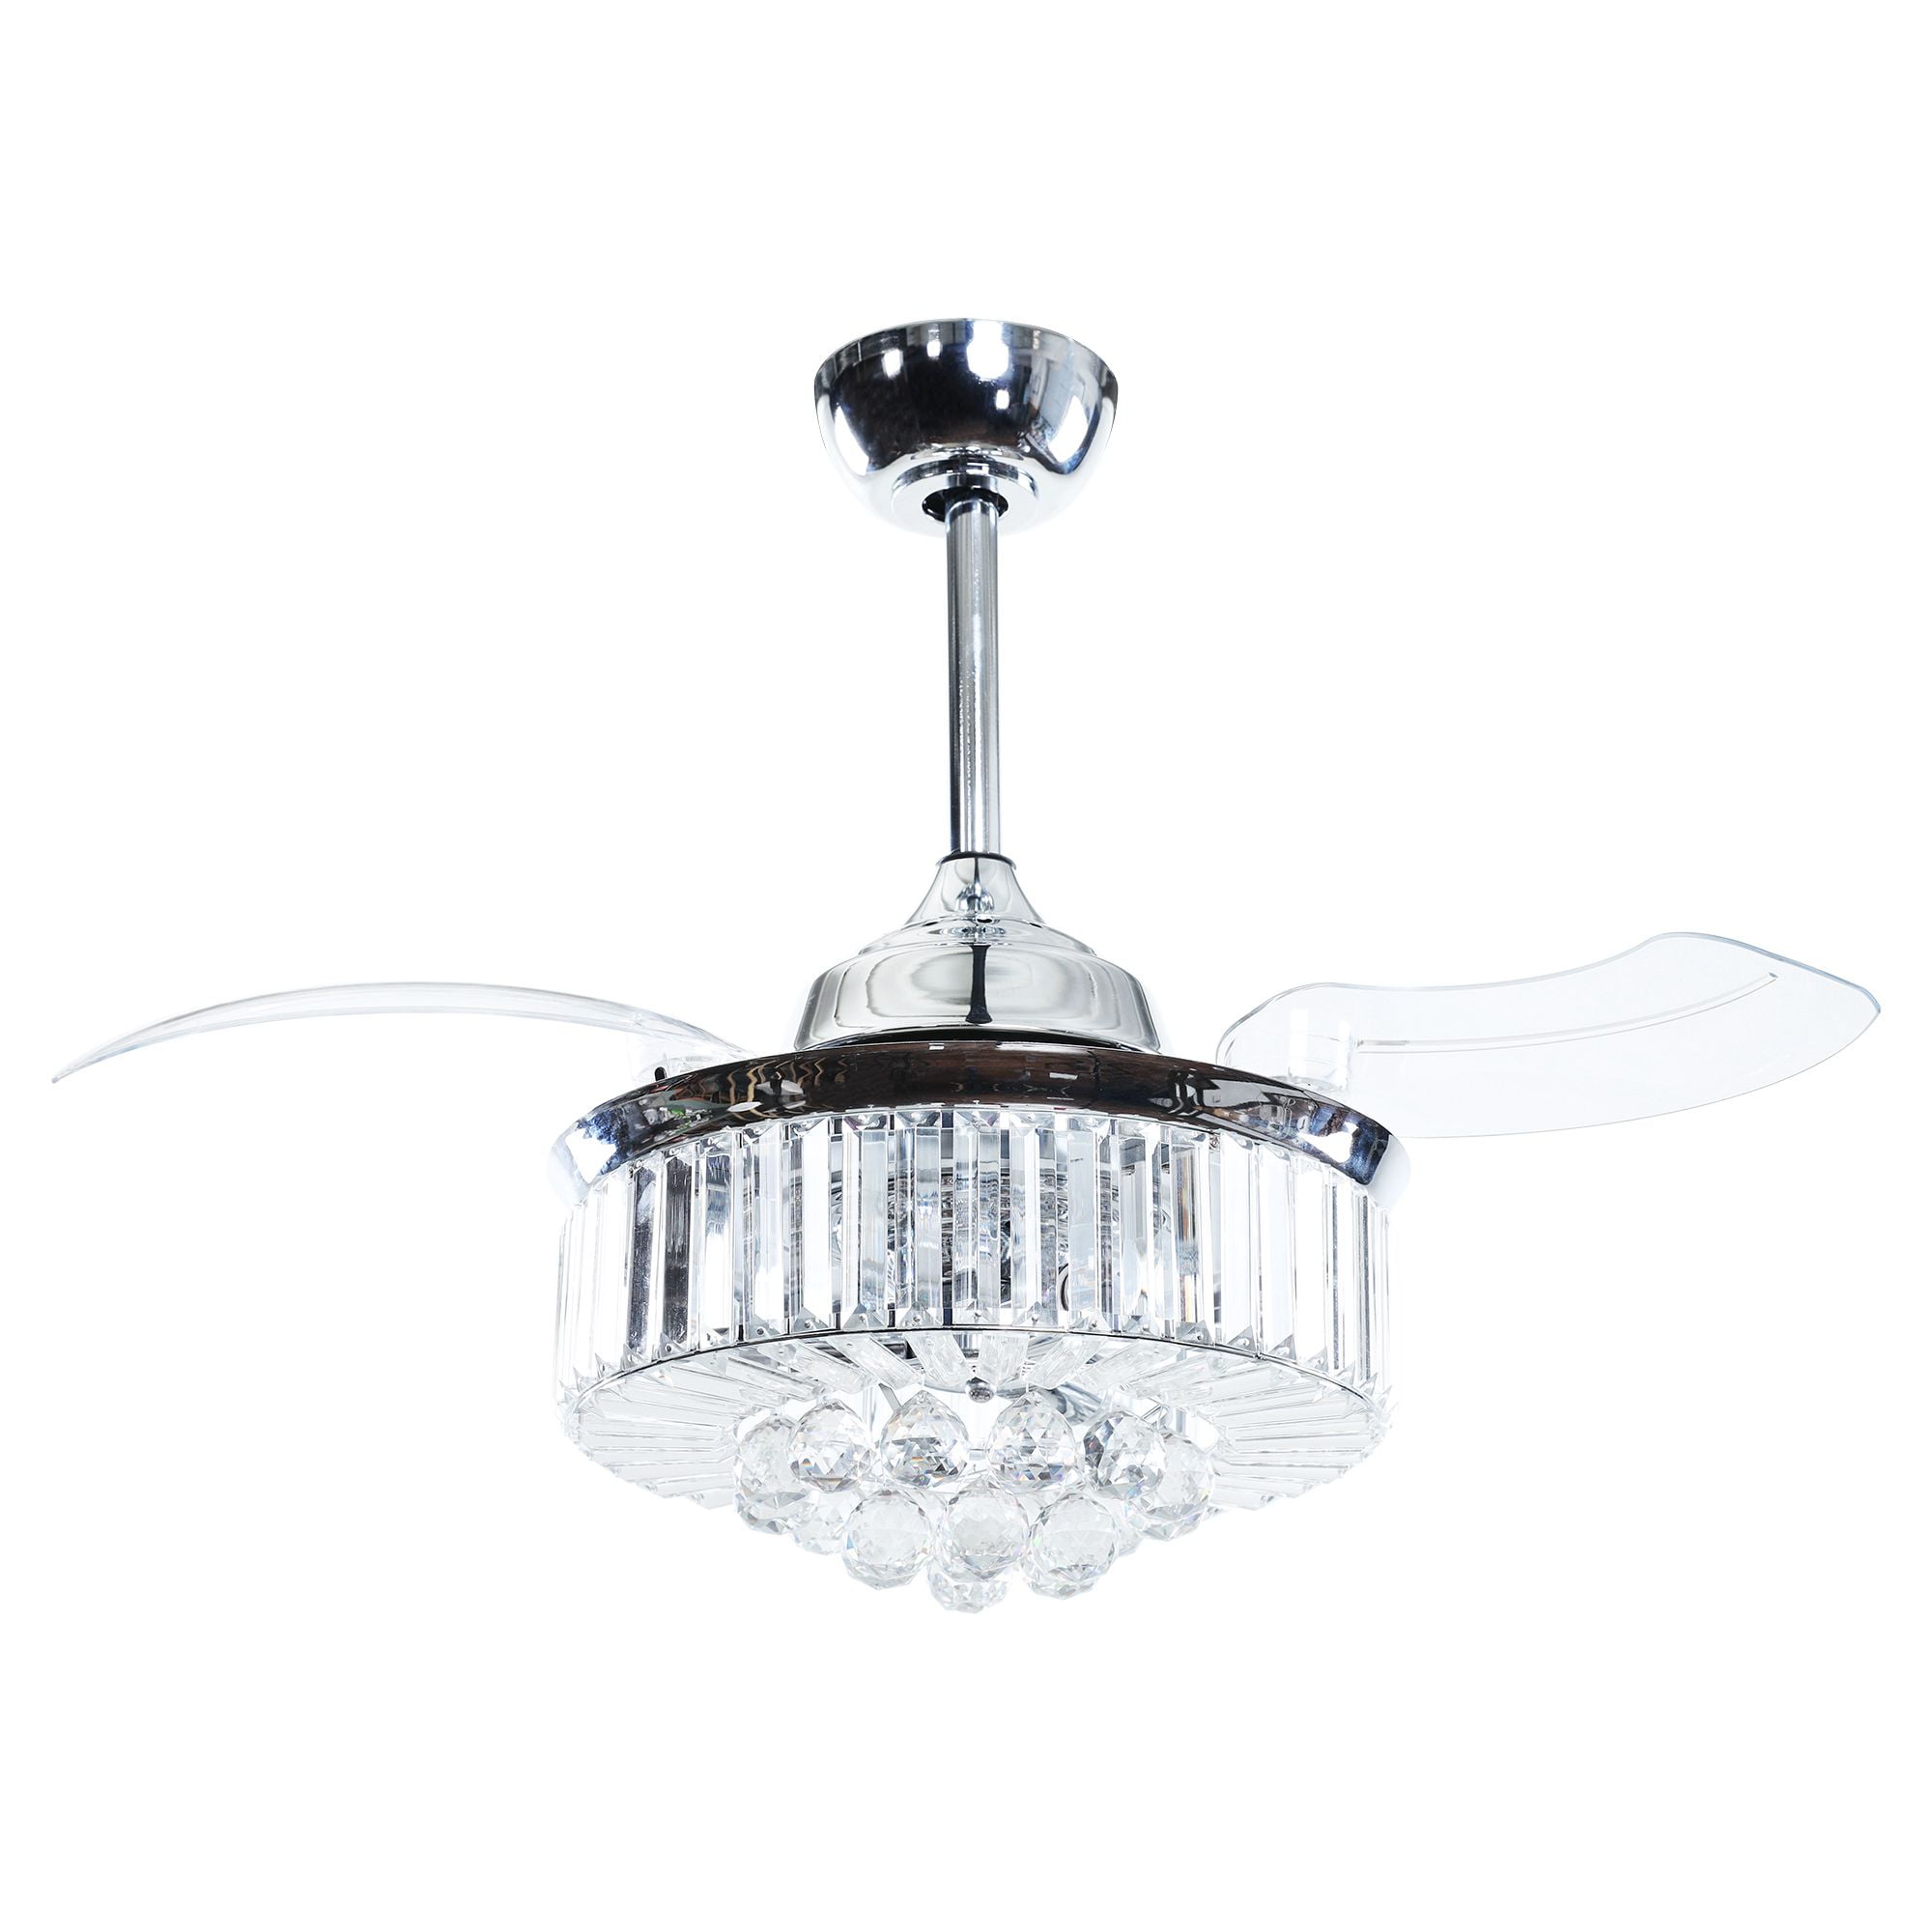 Details about   Retractable 36-inch Crystal 3-Blades Ceiling Fans Chandelier 